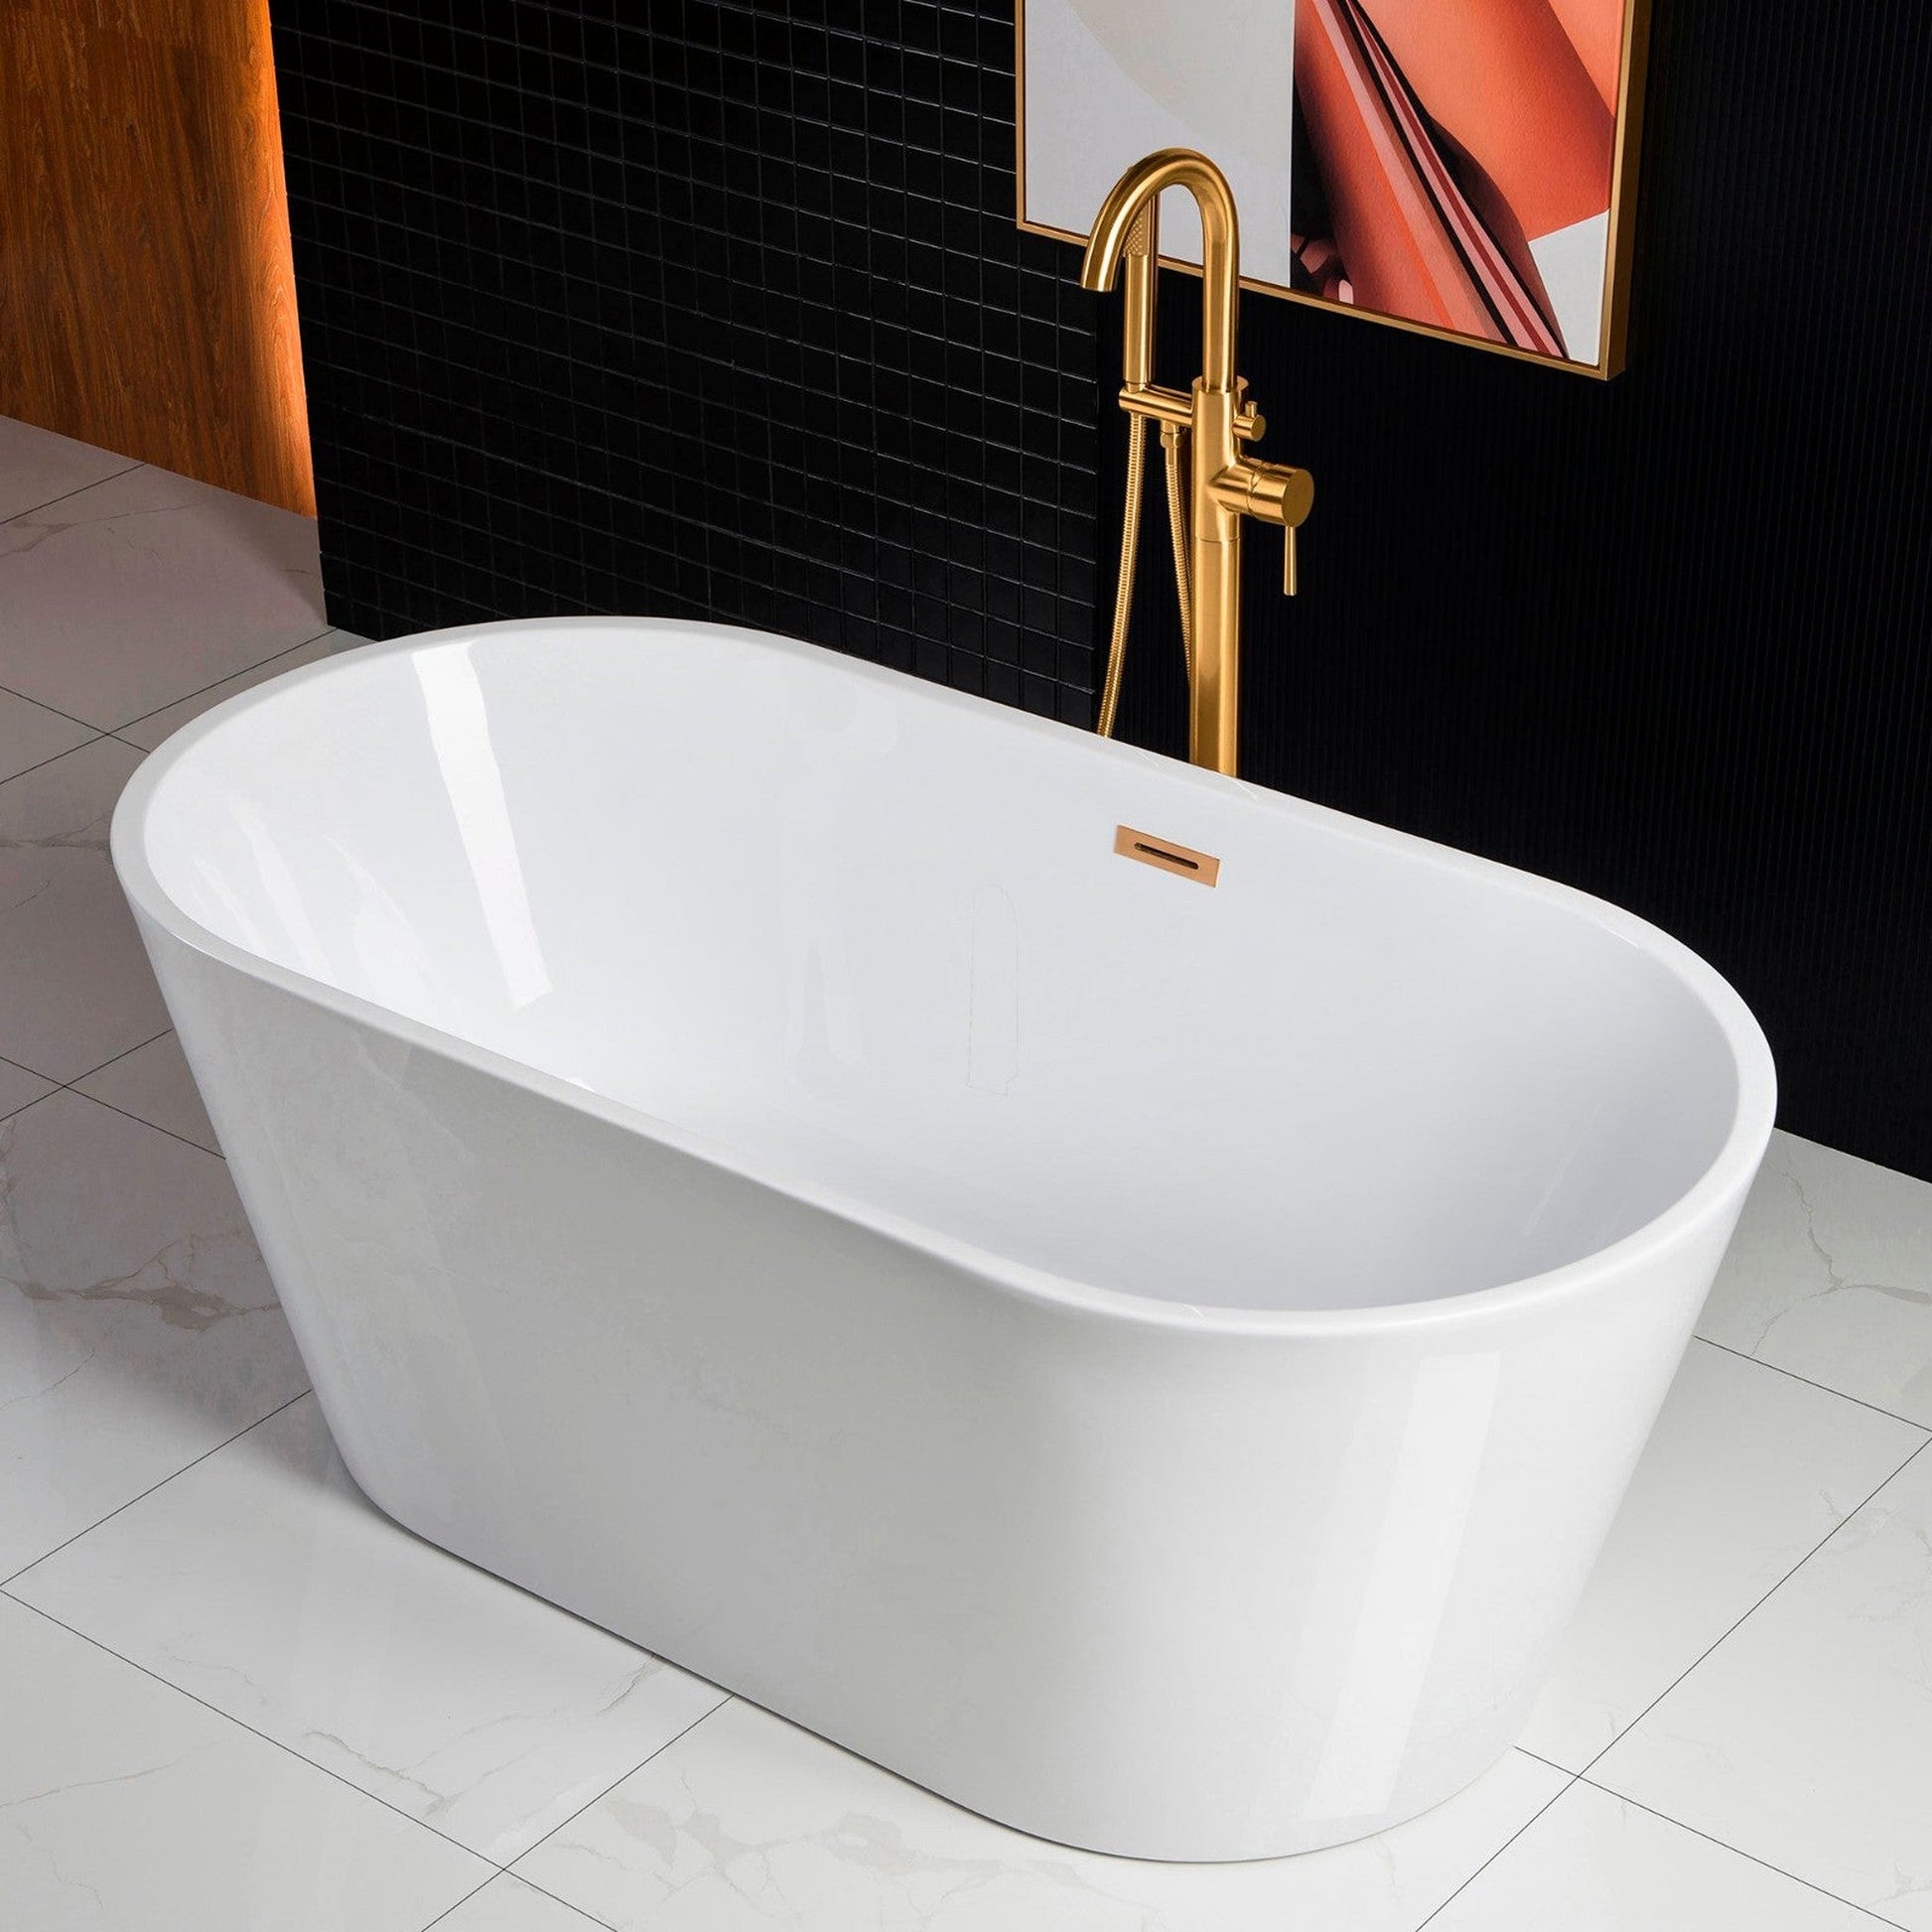 WoodBridge B0014 59" White Acrylic Freestanding Soaking Bathtub With Brushed Gold Drain, Overflow, F0026BGRD Tub Filler and Caddy Tray